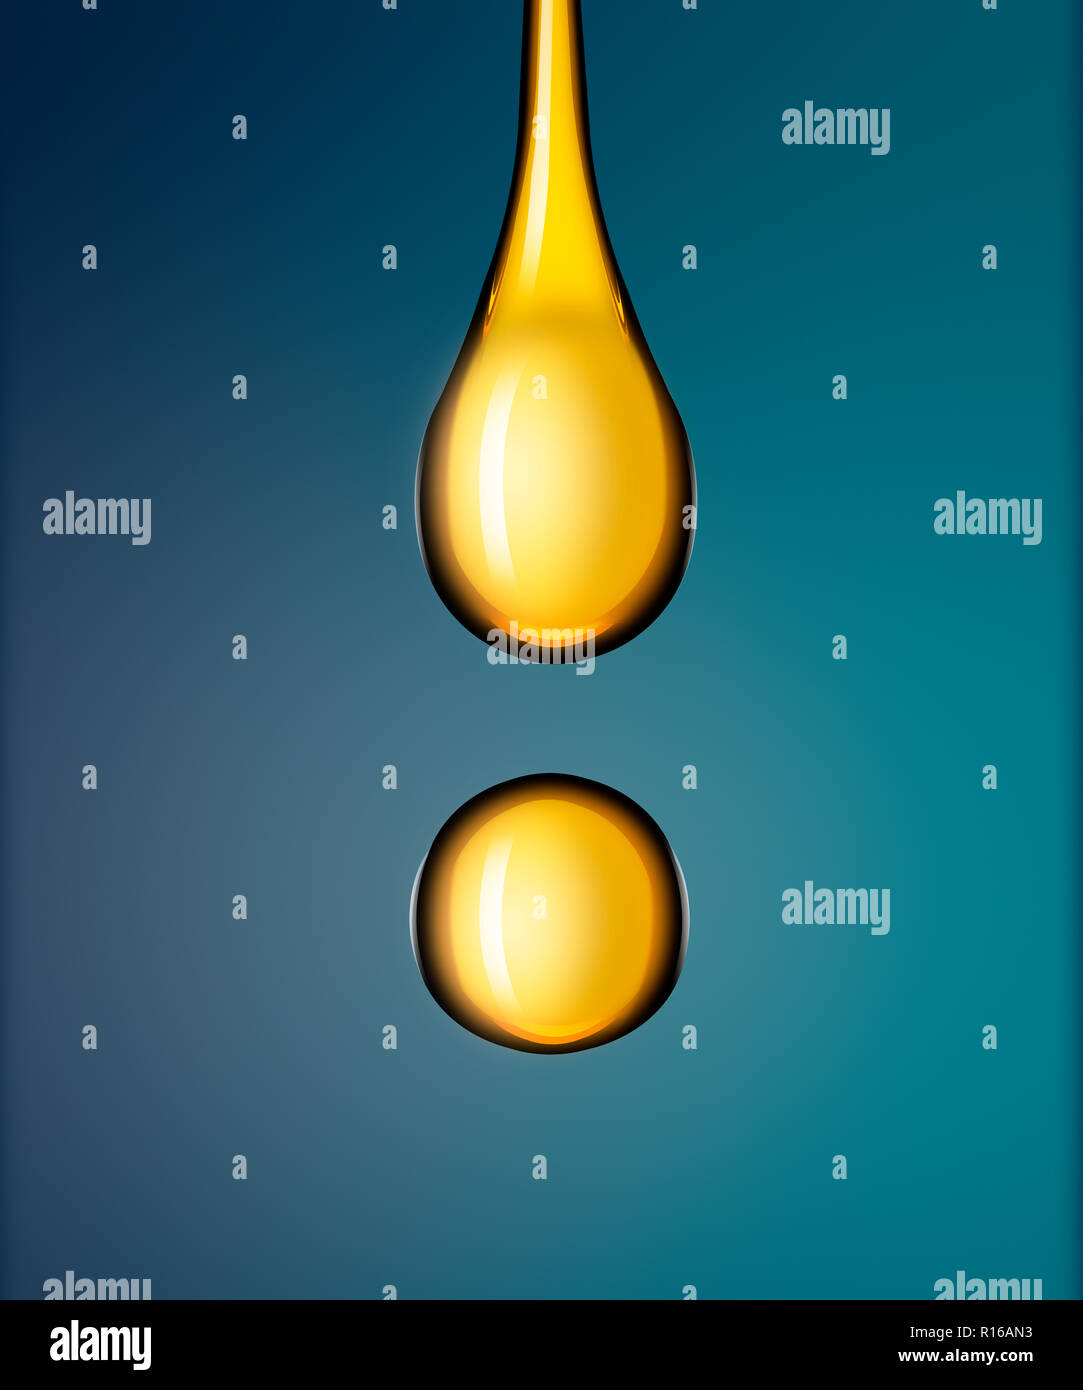 Drop and droplet of golden liquid against blue background Stock Photo